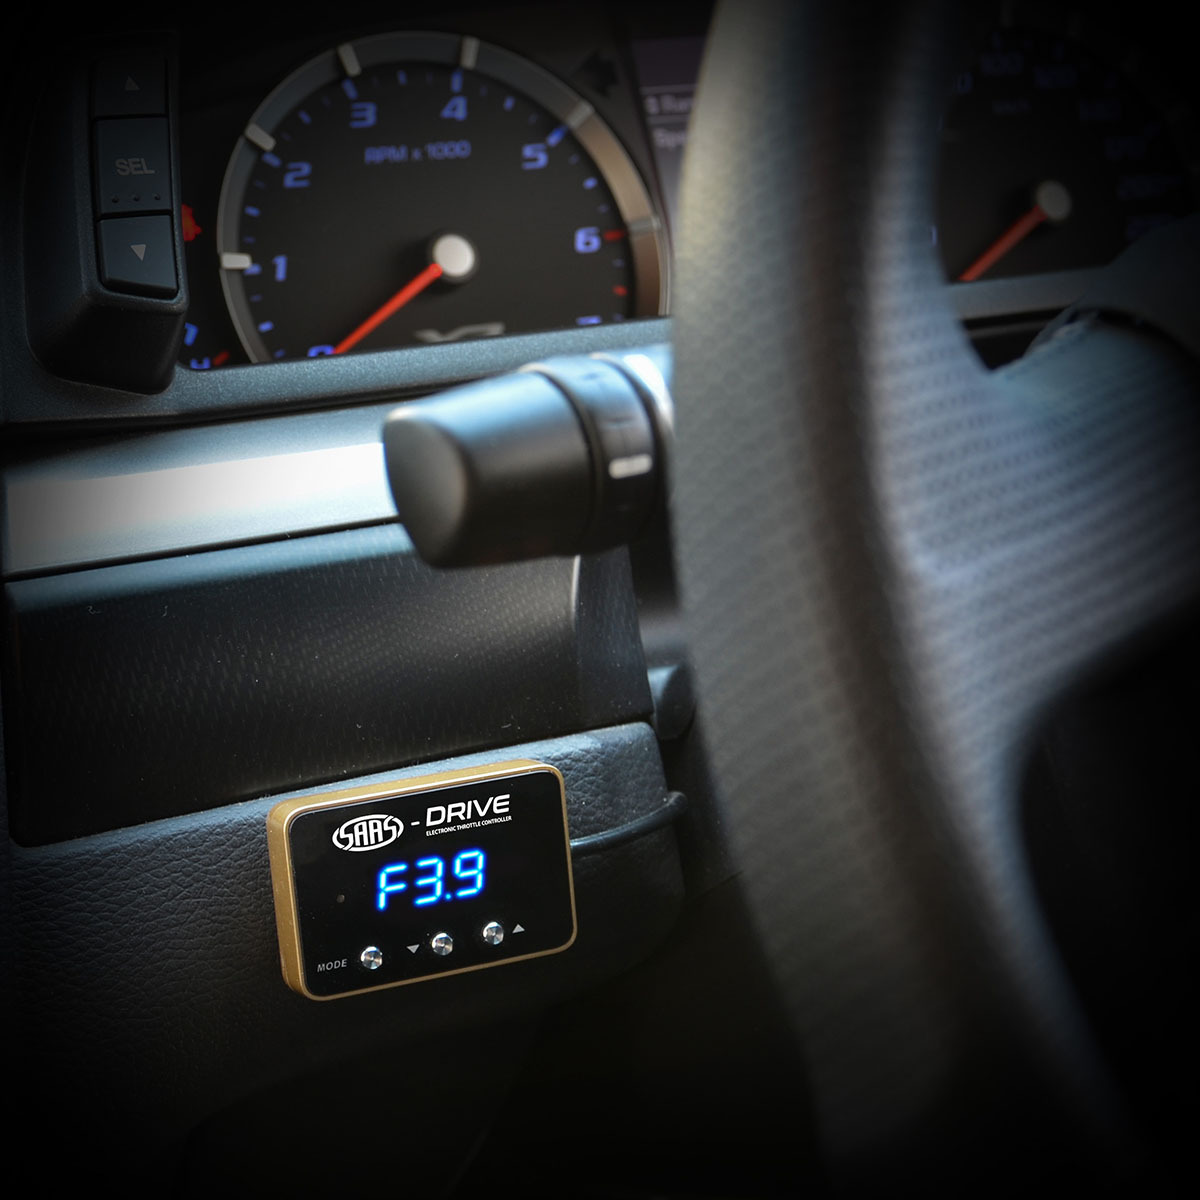 SAAS-Drive Ford Edge 2nd Gen 2015 > Throttle Controller 